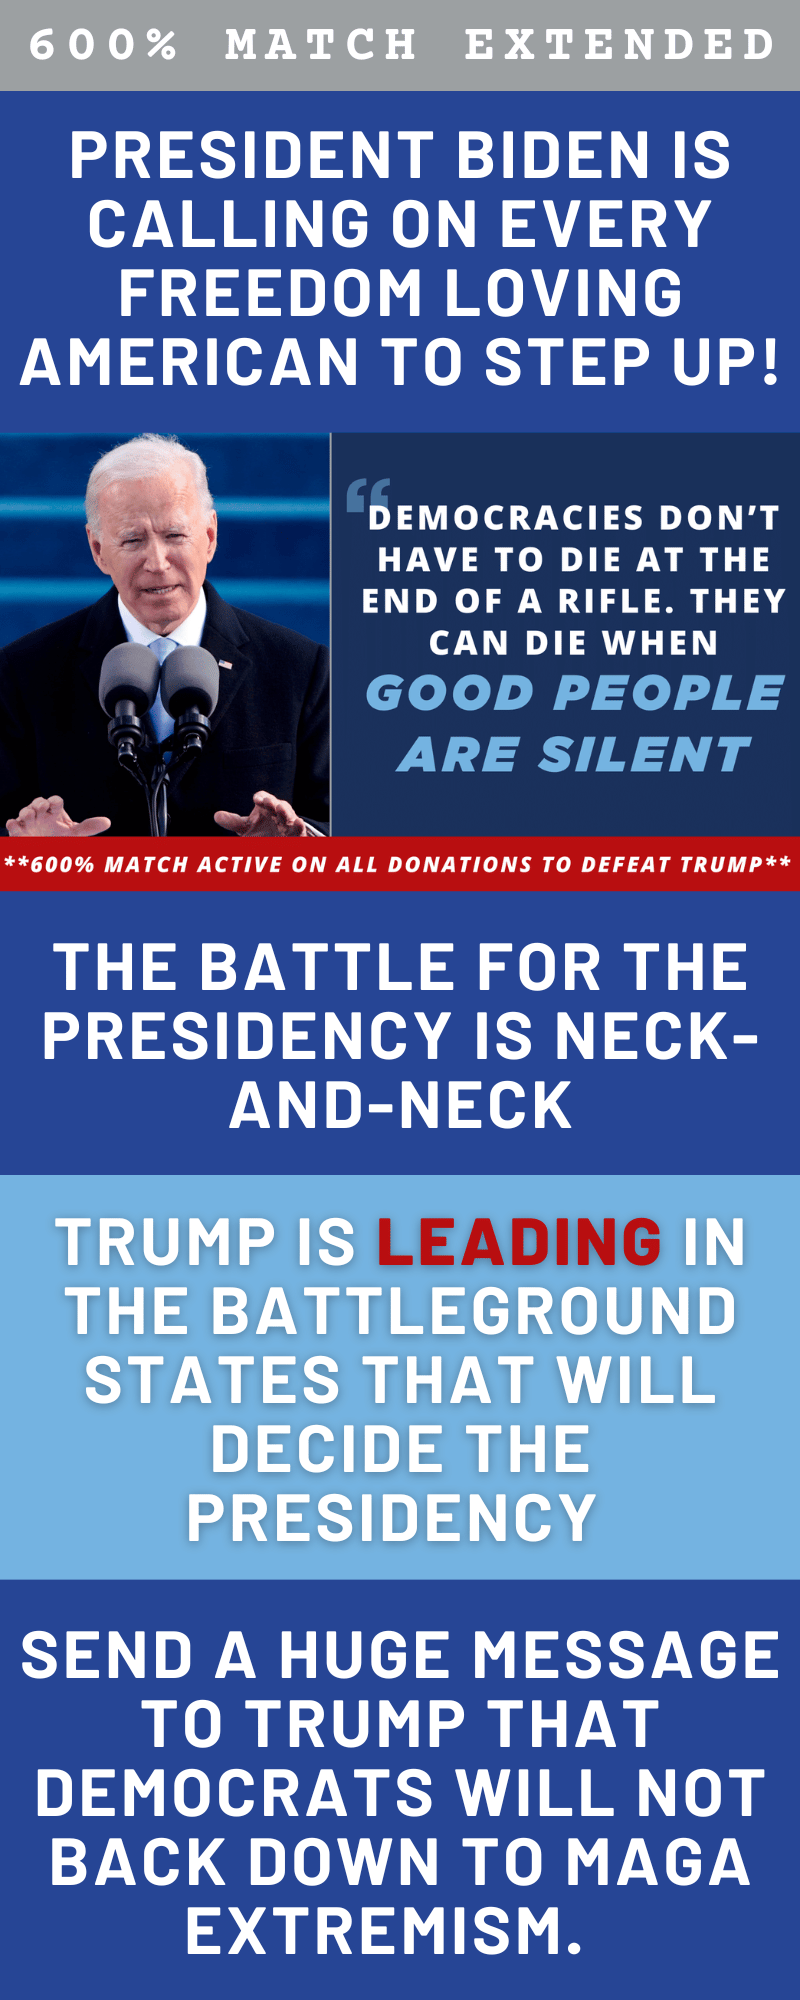 President Biden is calling on EVERY freedom loving American to step up! the battle for the Presidency is neck-and-NECK. Trump is LEADing in the battleground states that will decide the Presidency. send a HUGE message to Trump that Democrats WILL NOT back down to MAGA extremism. 